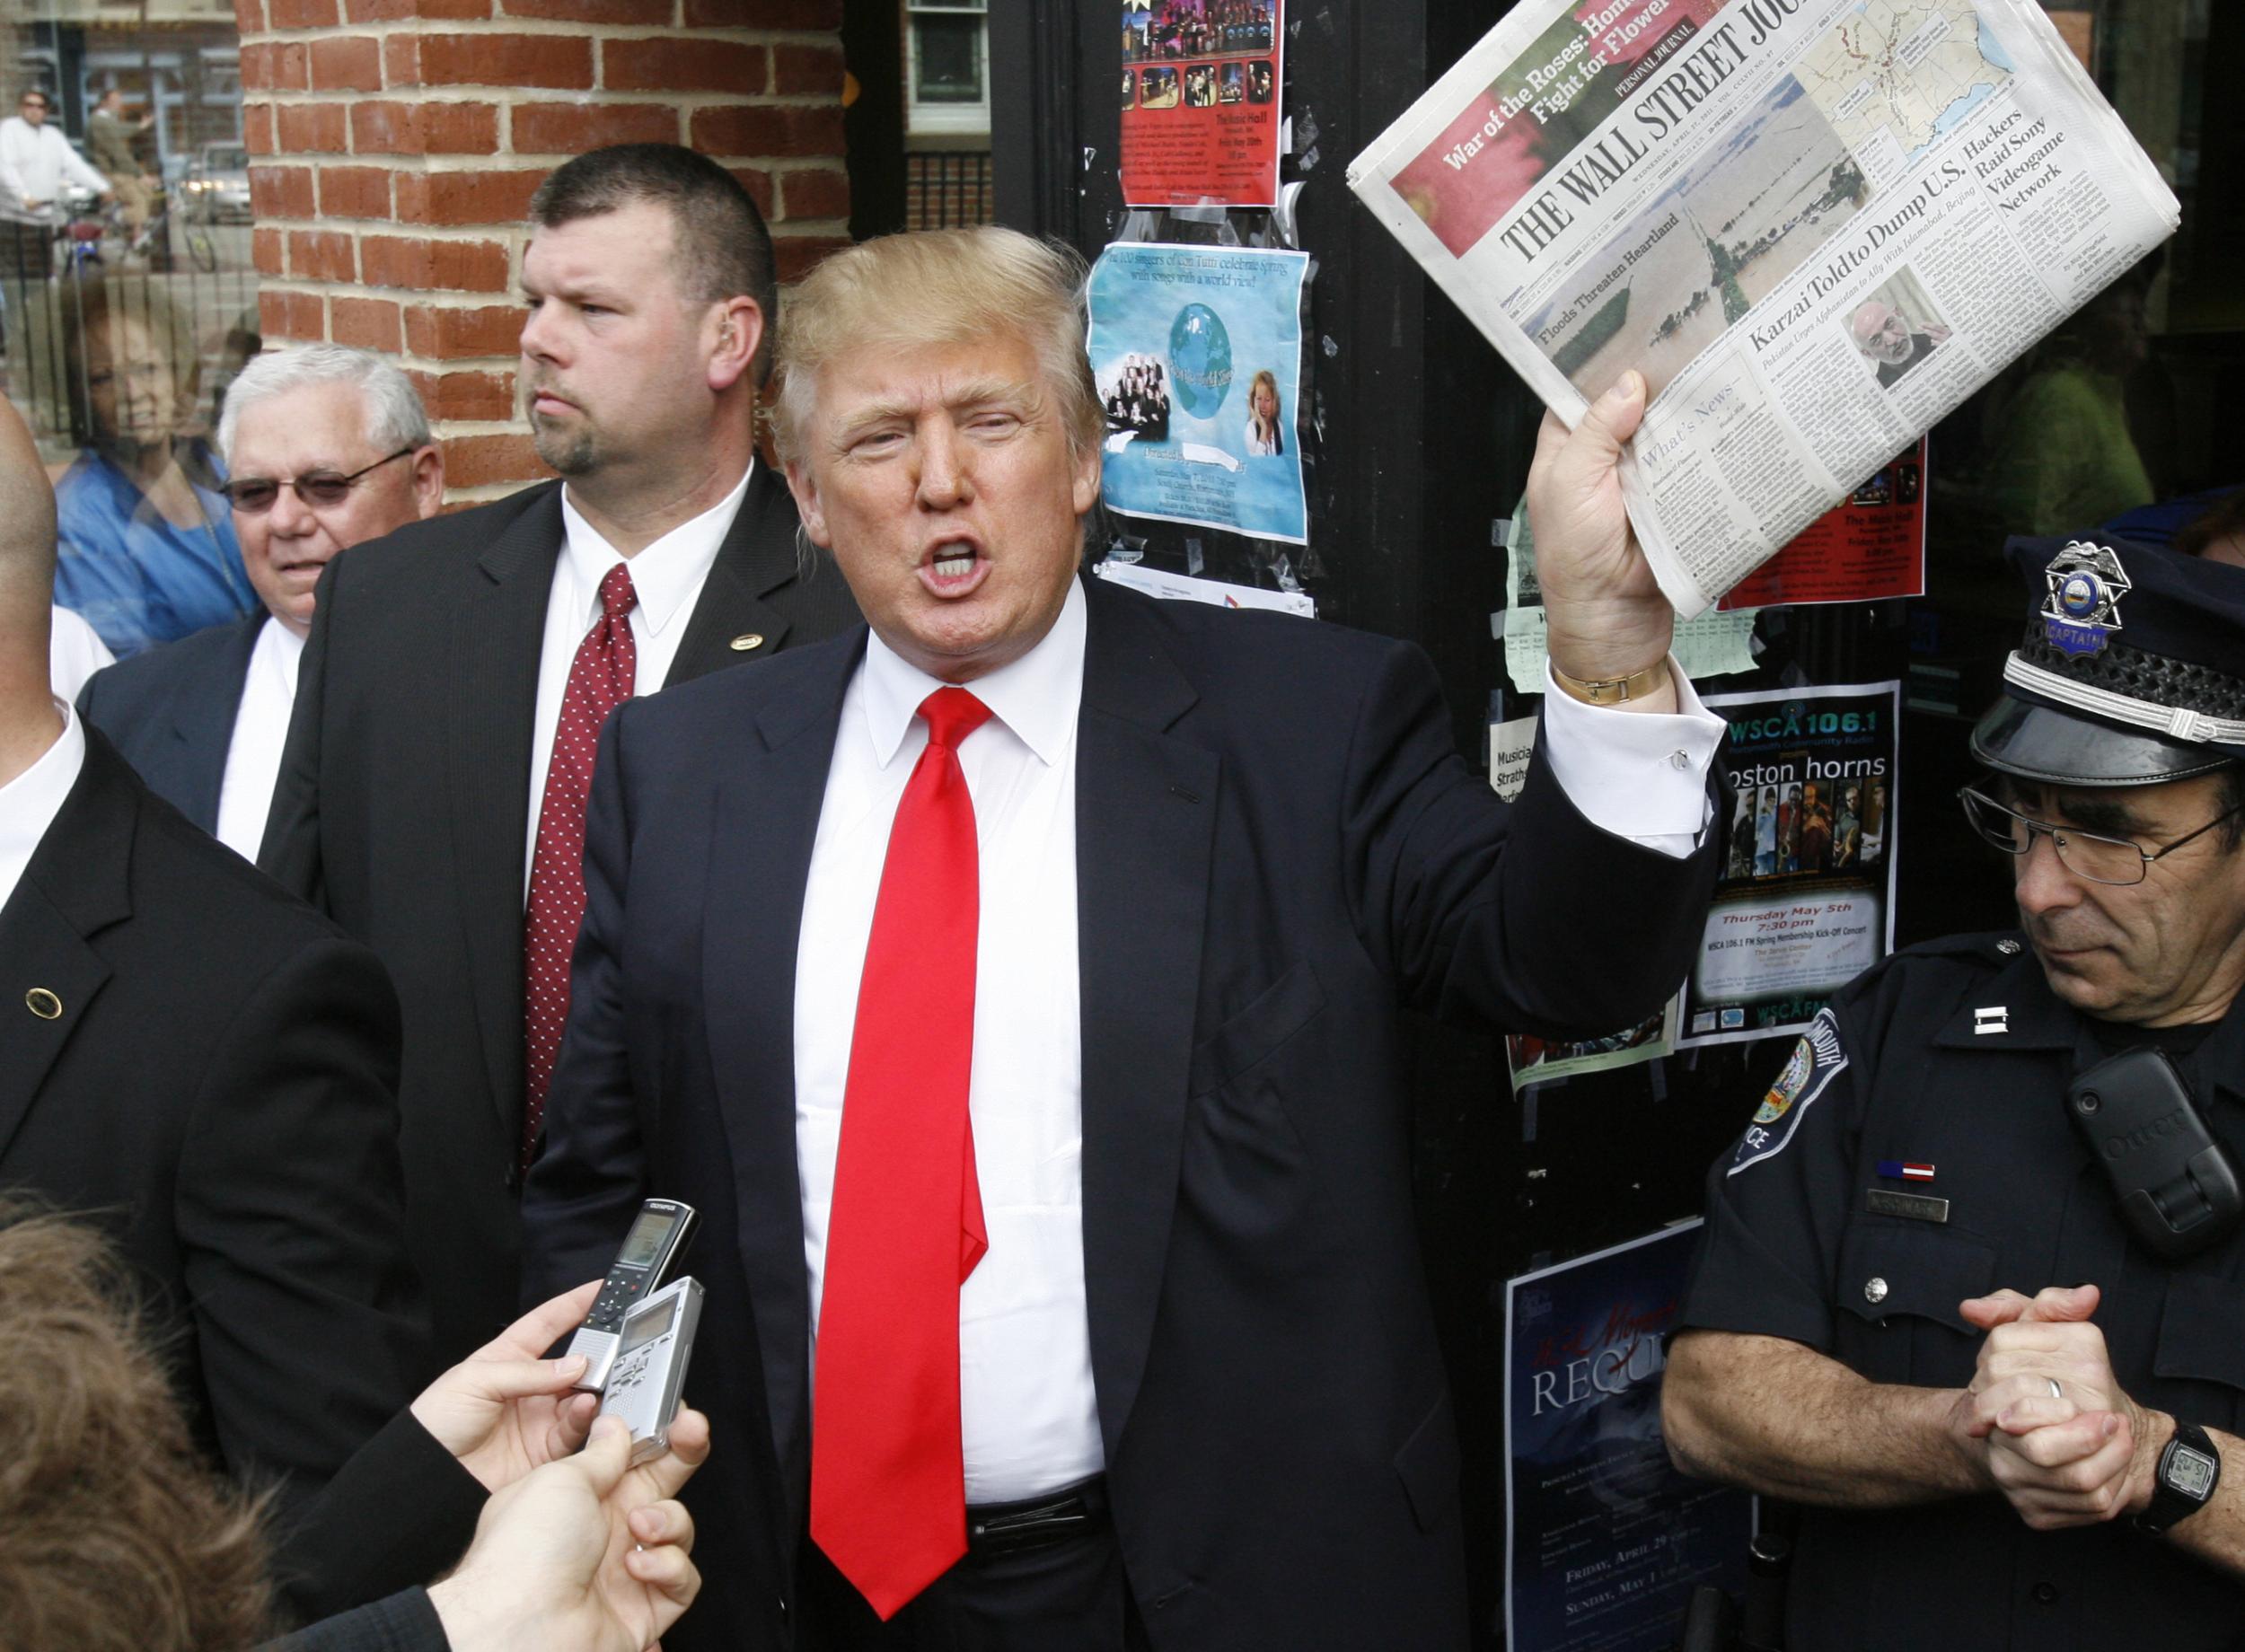 Donald Trump holds up a newspaper as he makes a reference to a story in it while walking through downtown Portsmouth, New Hampshire.